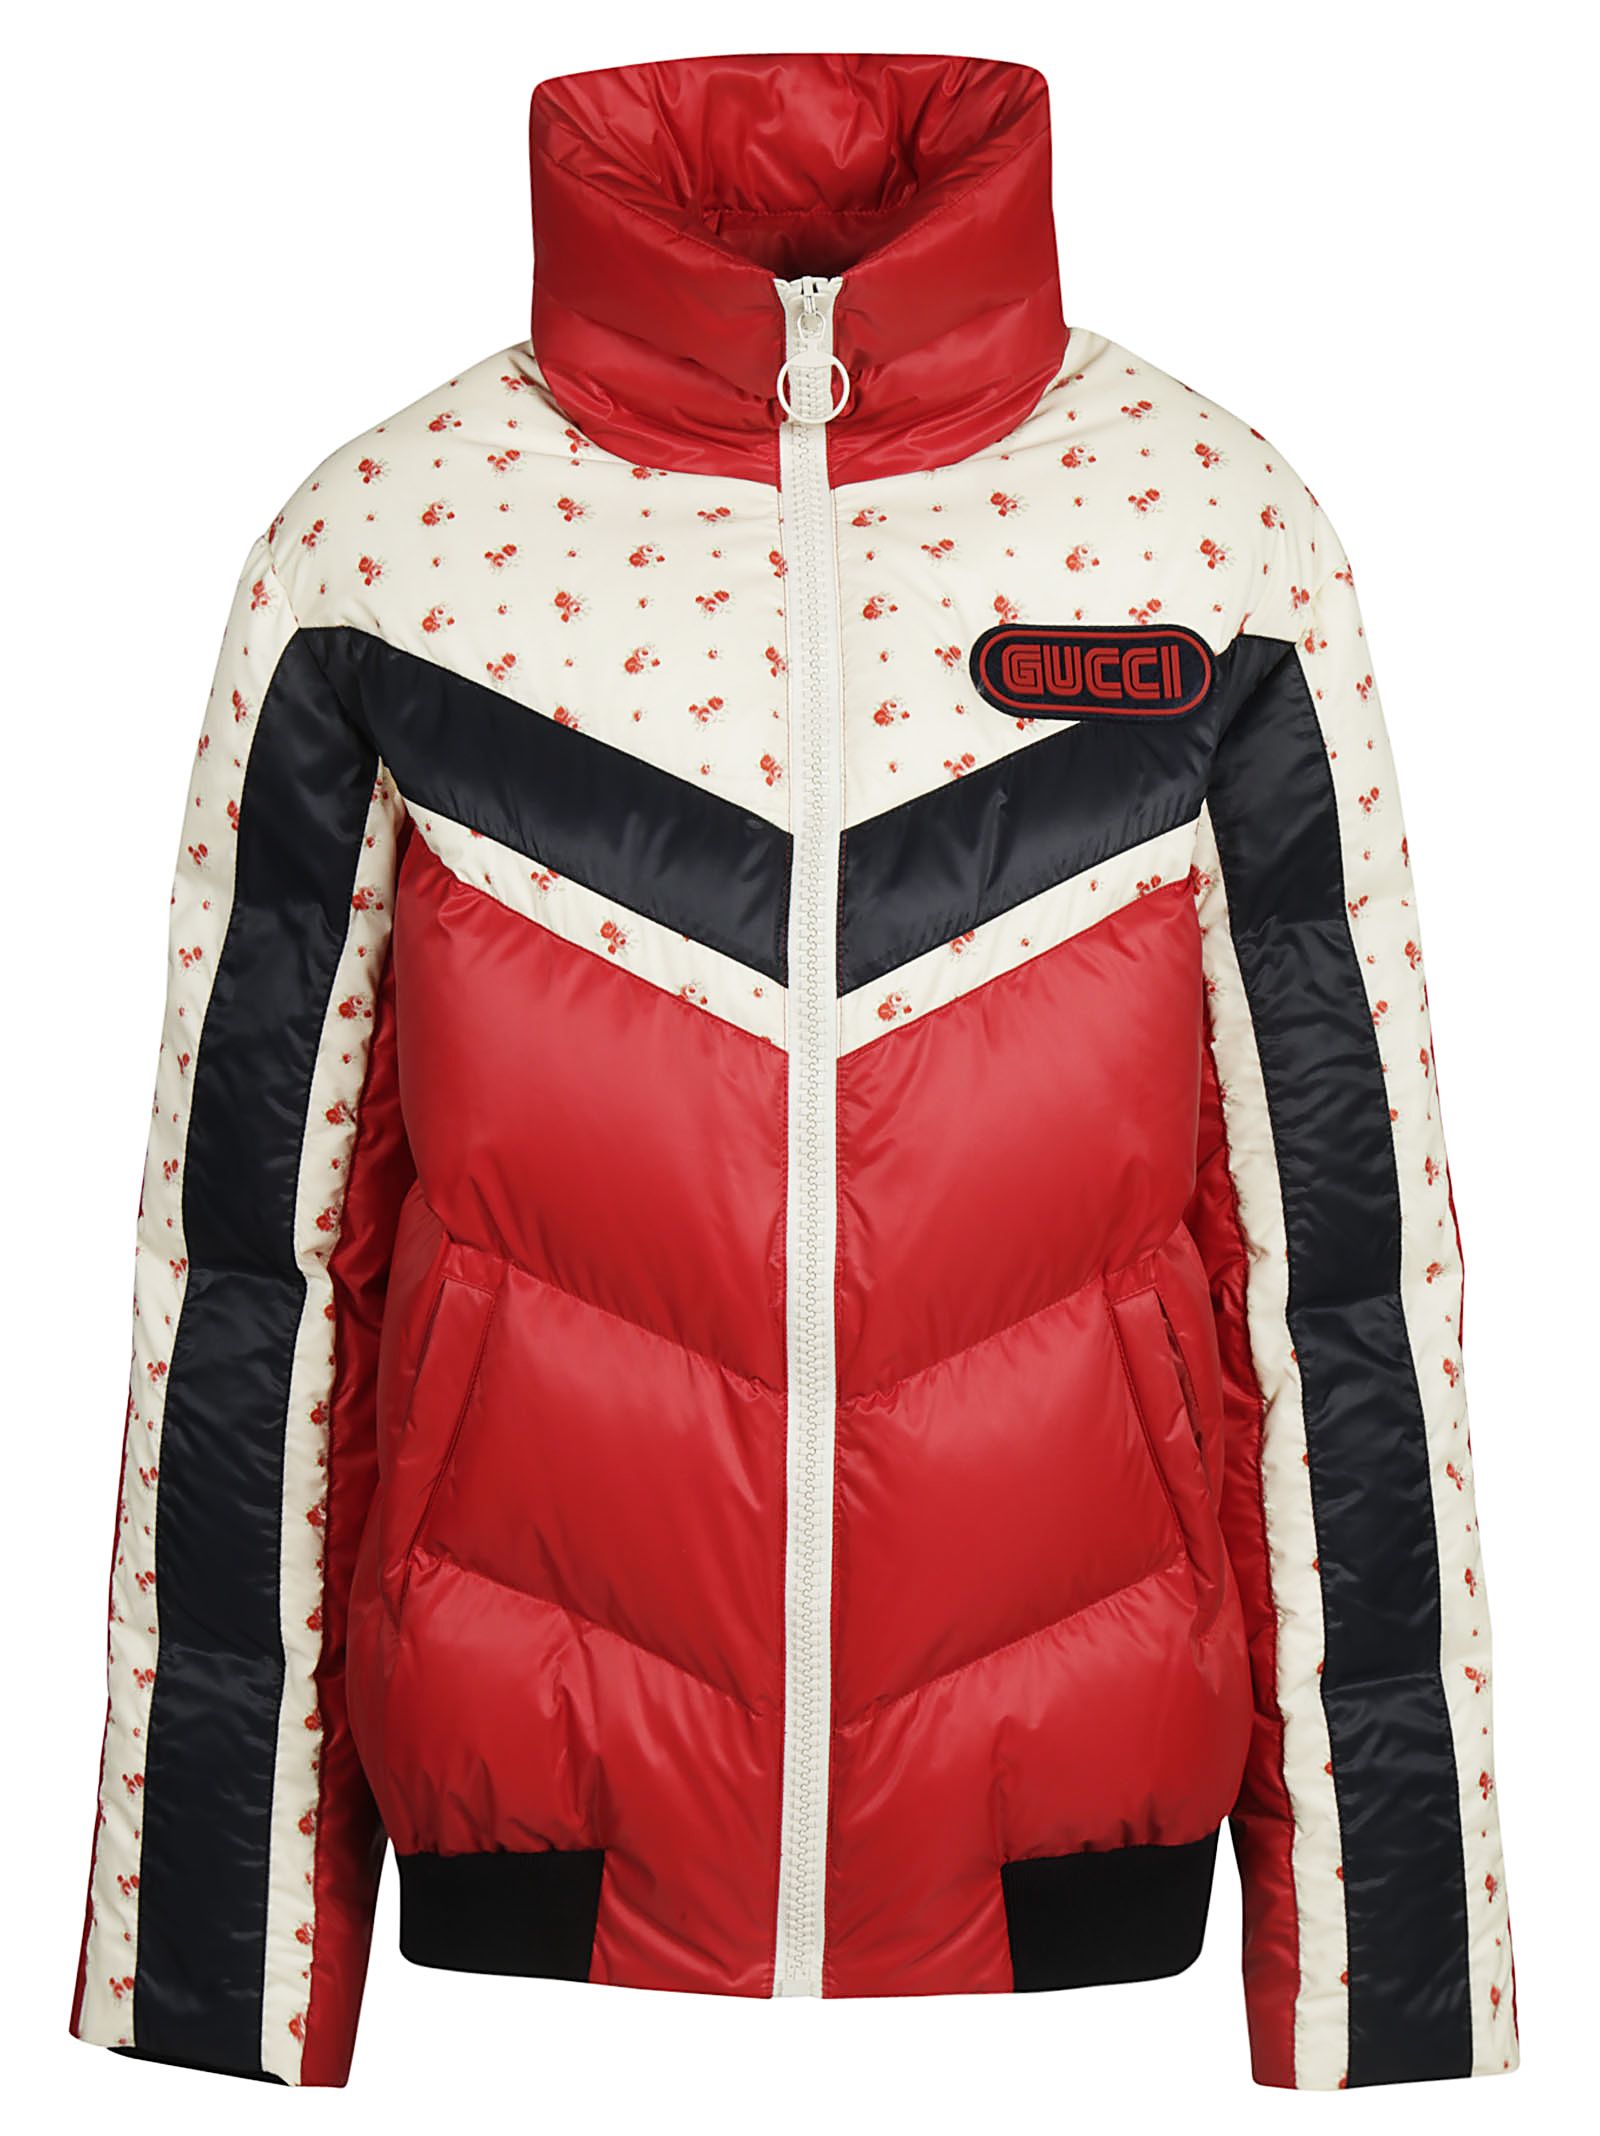 italist | Best price in the market for Gucci Gucci Printed Down Jacket